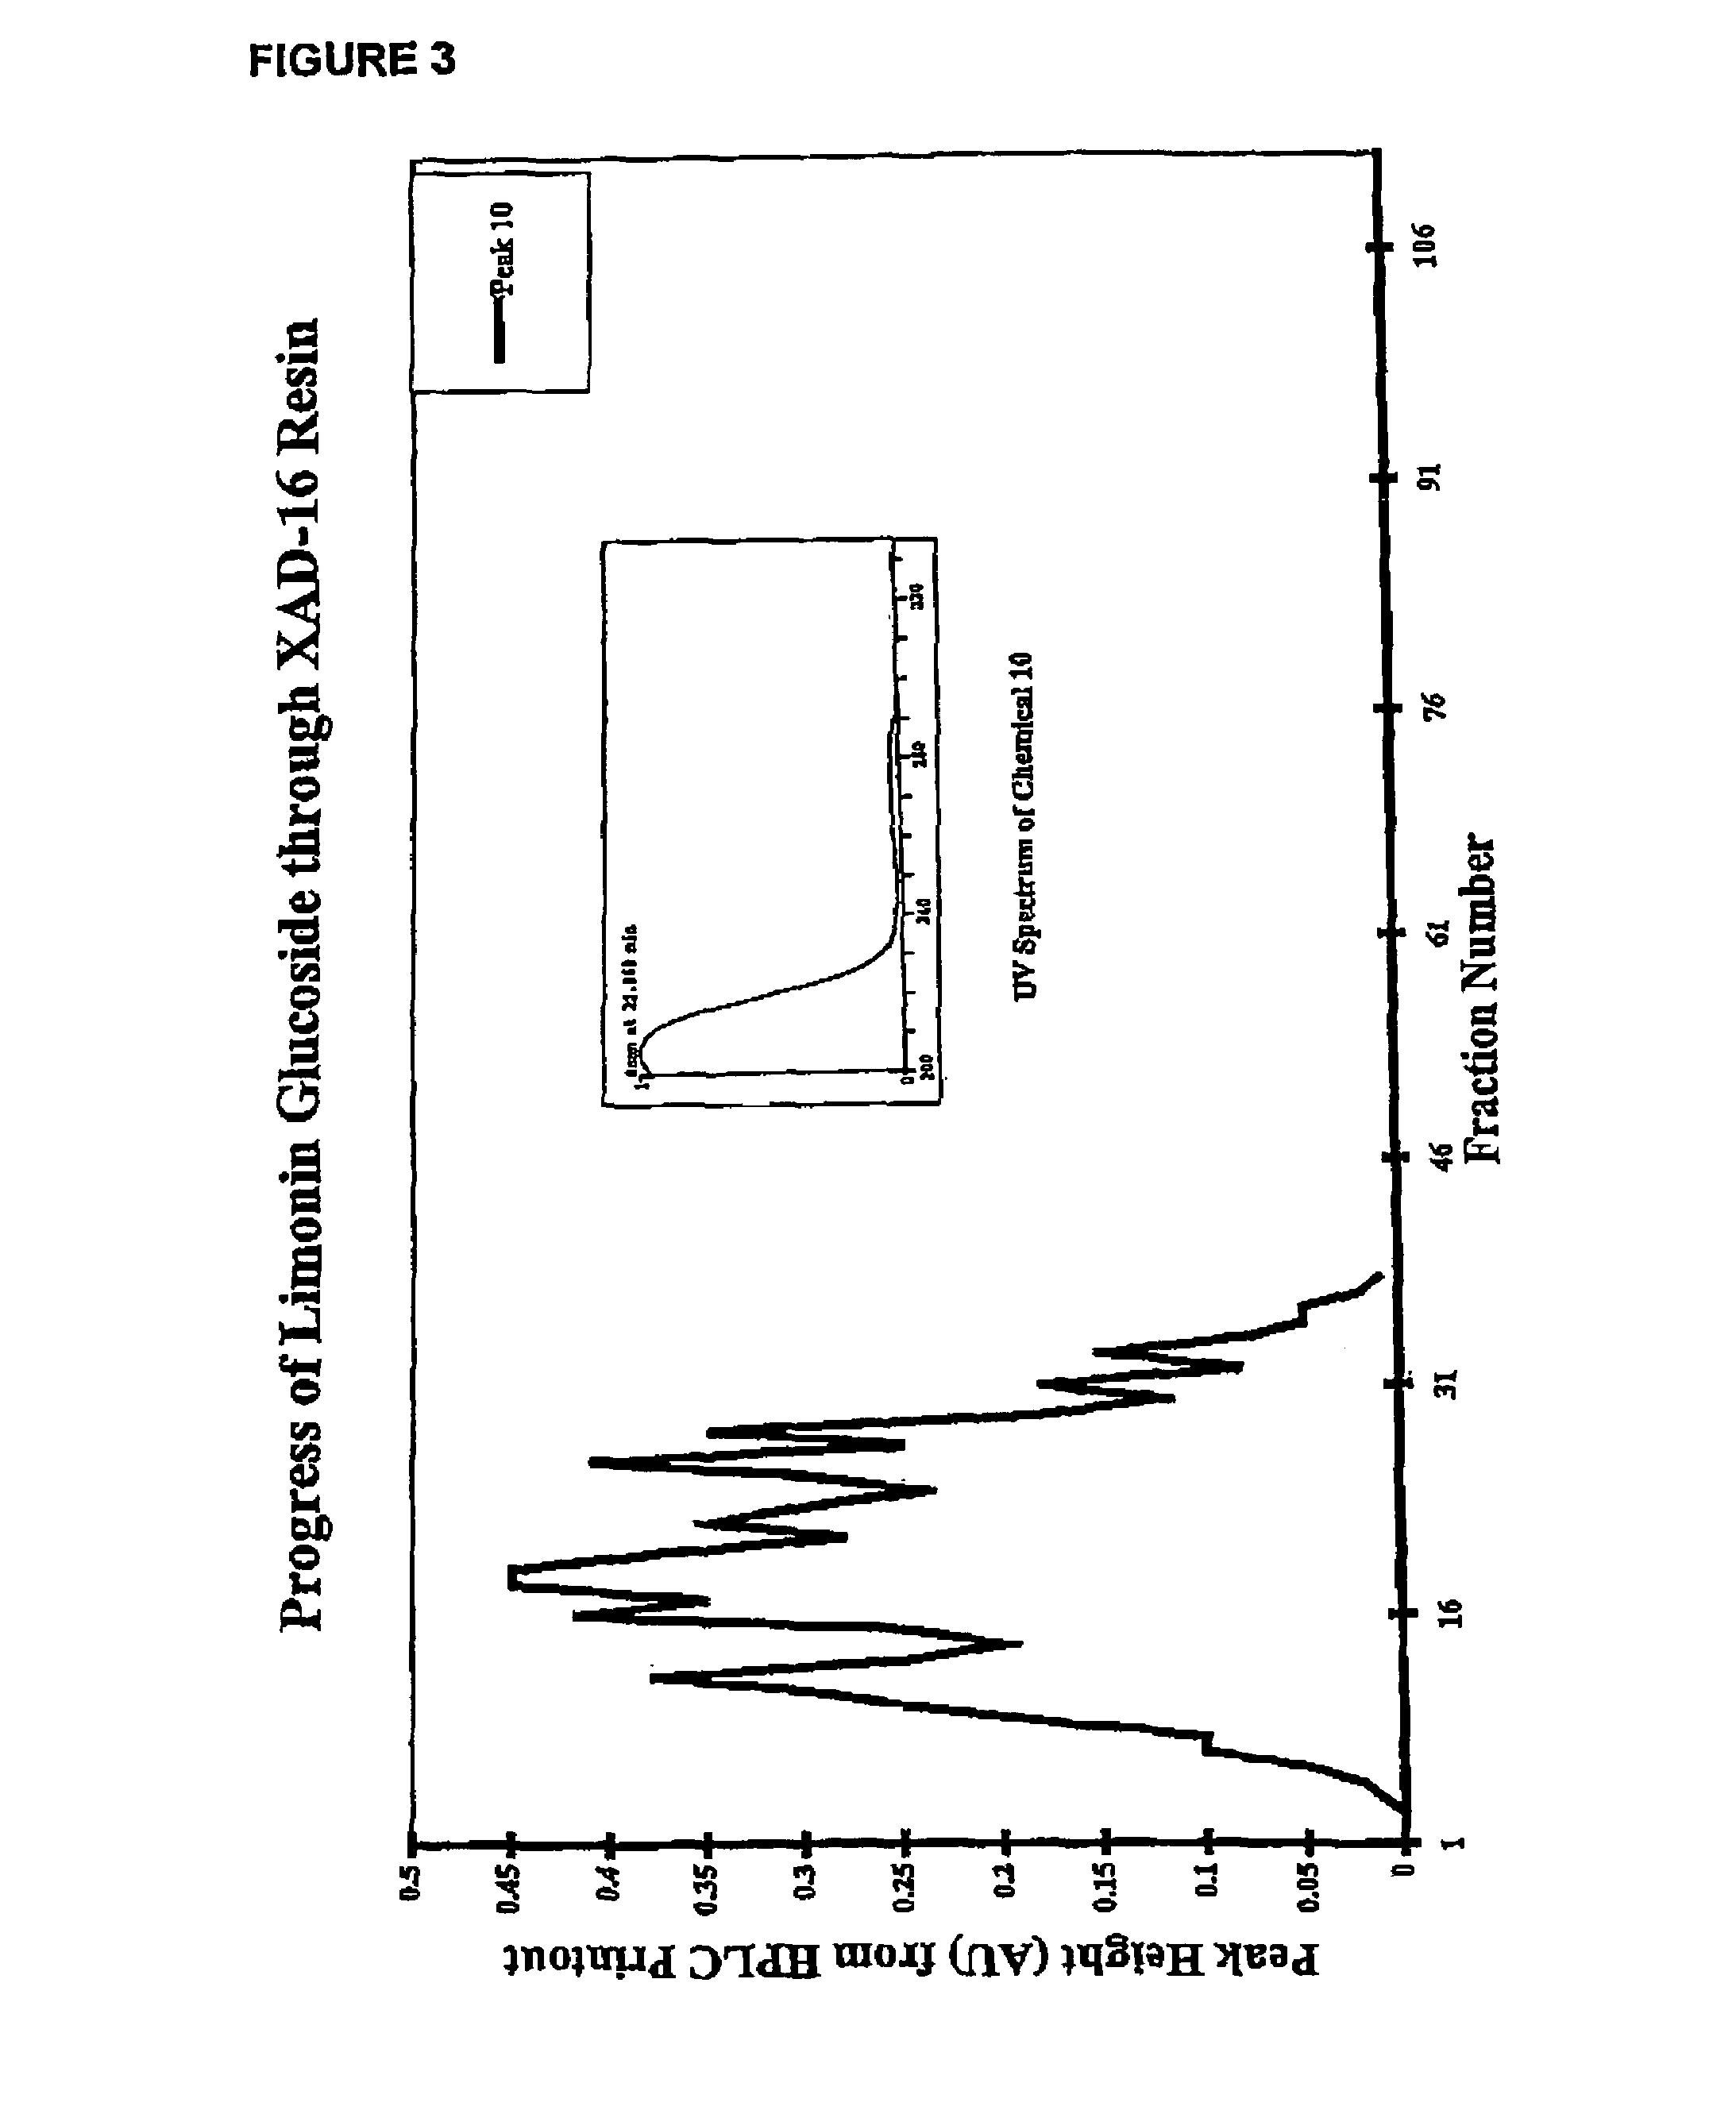 Process for selectivity extracting bioactive components